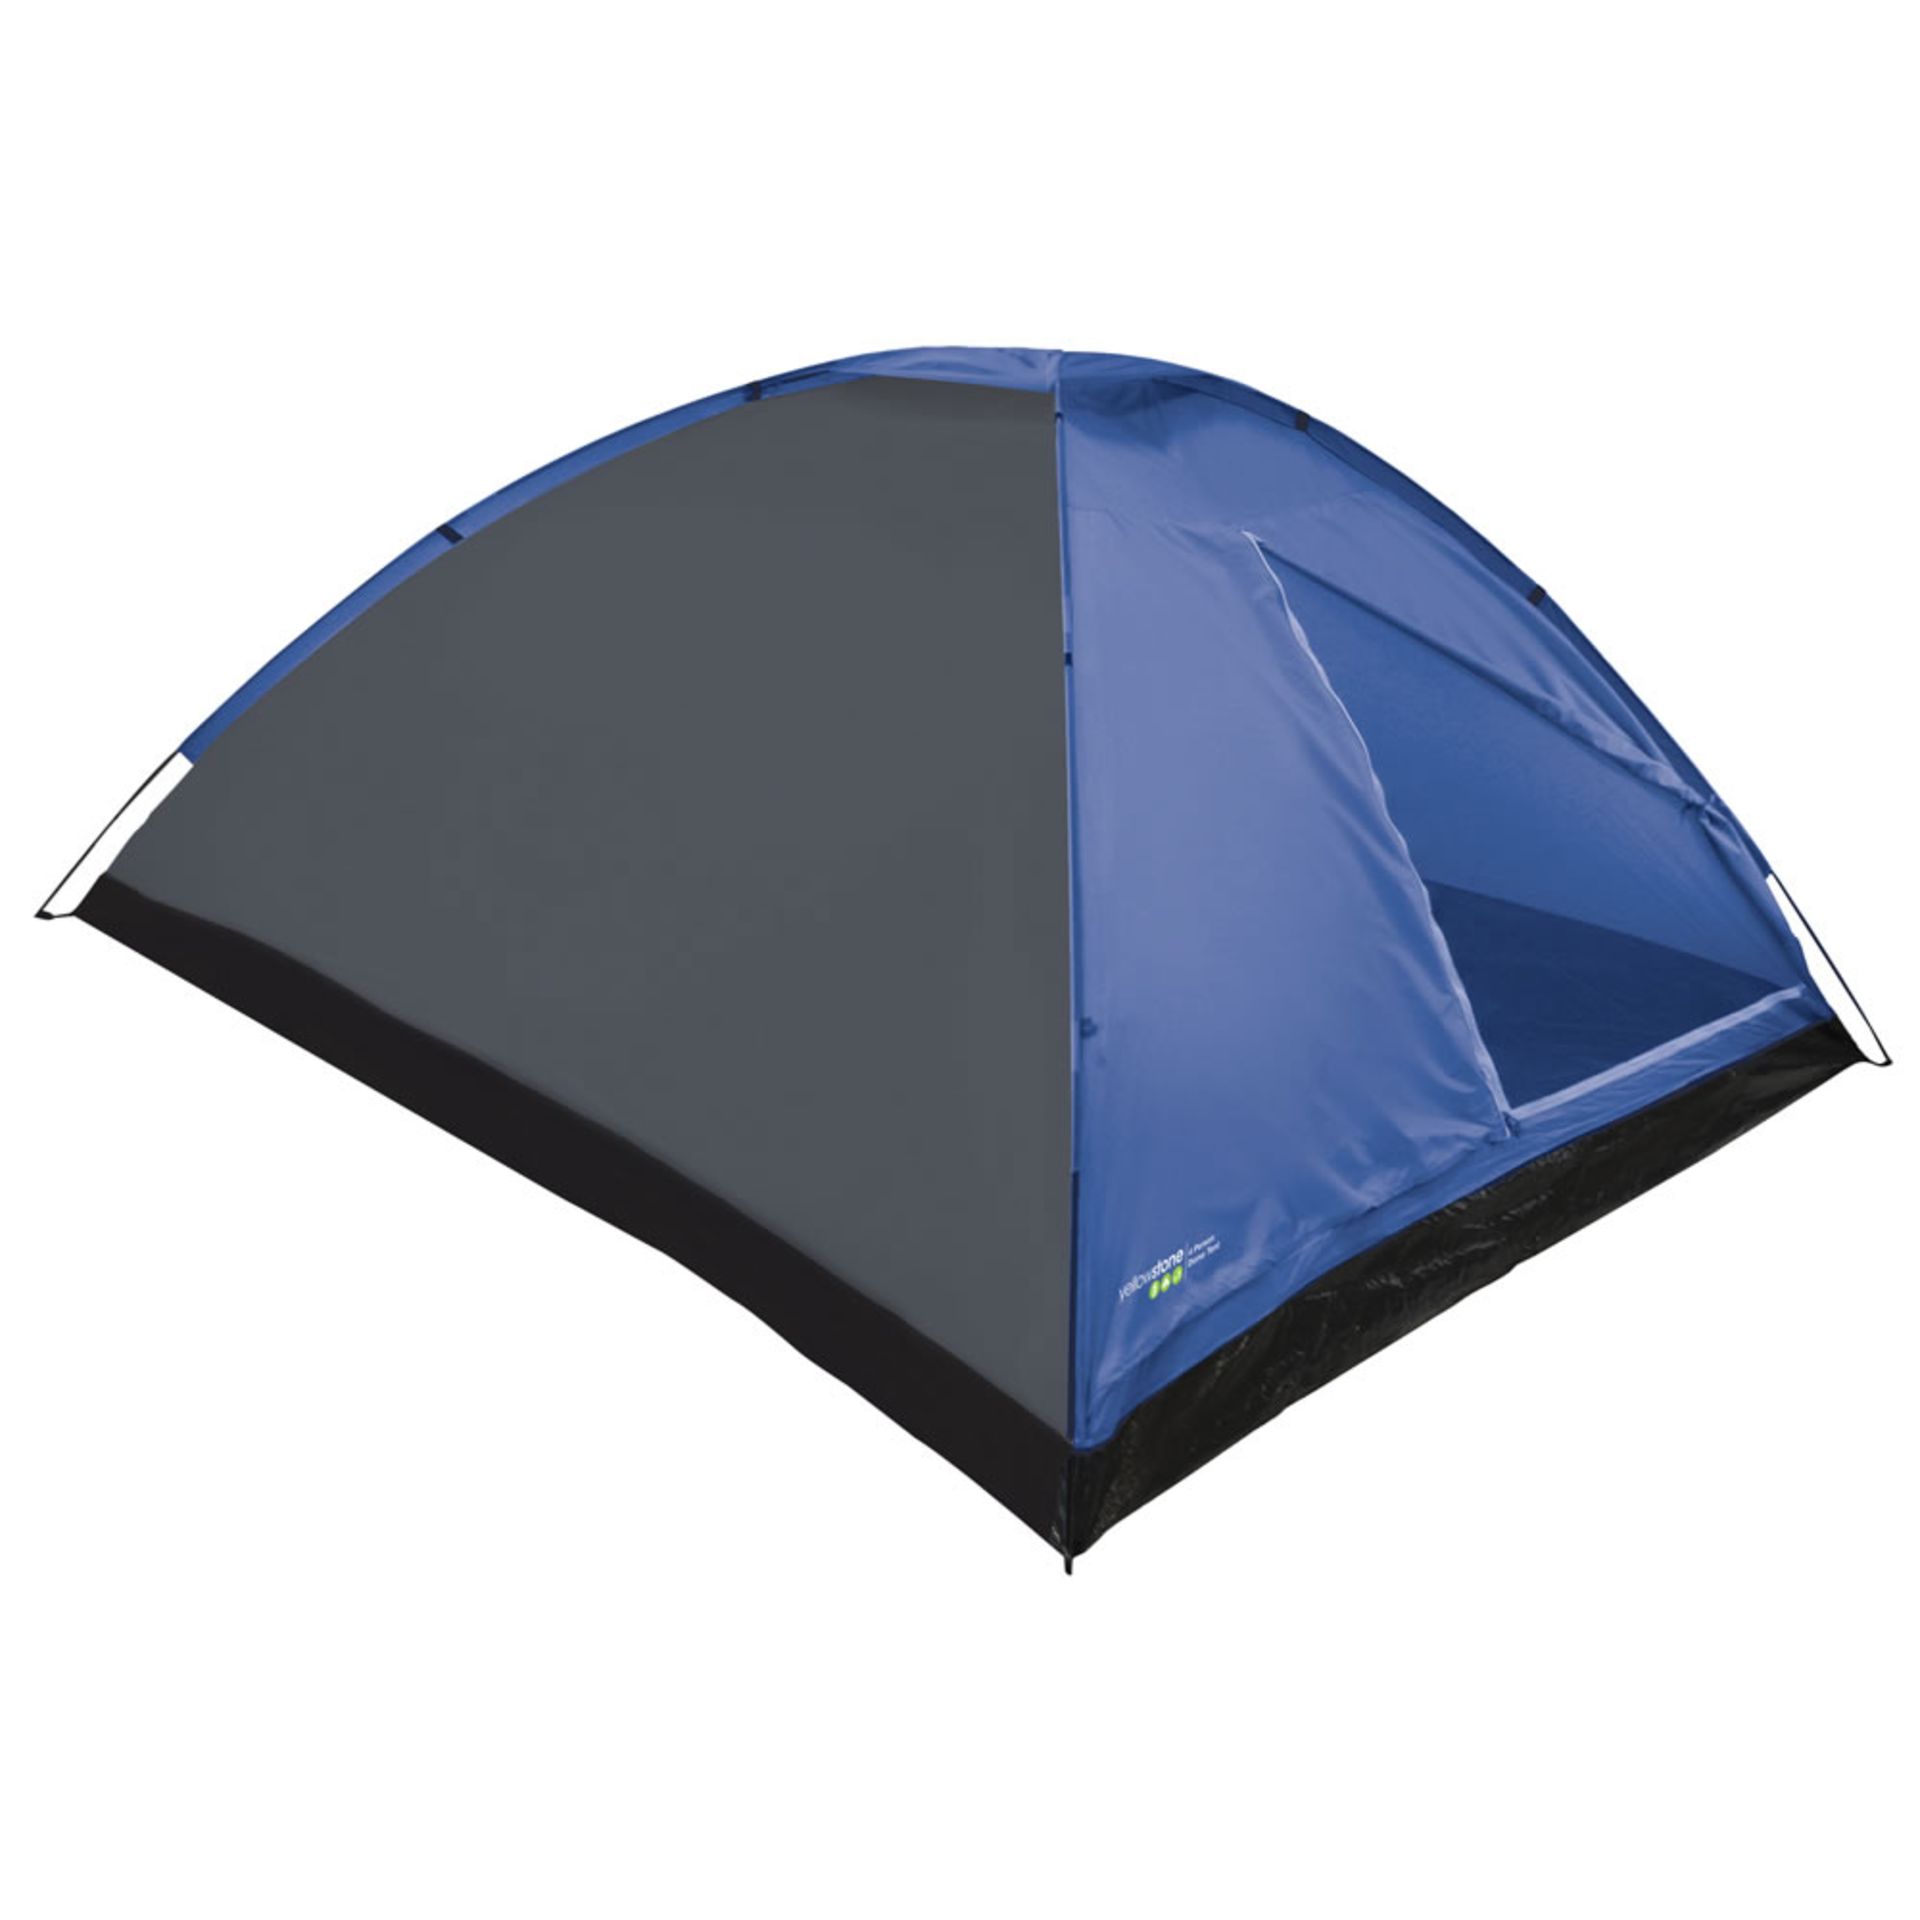 V Grade A 4 Person Dome Tent With Taped seams And Fibreglass Poles RRP25.00